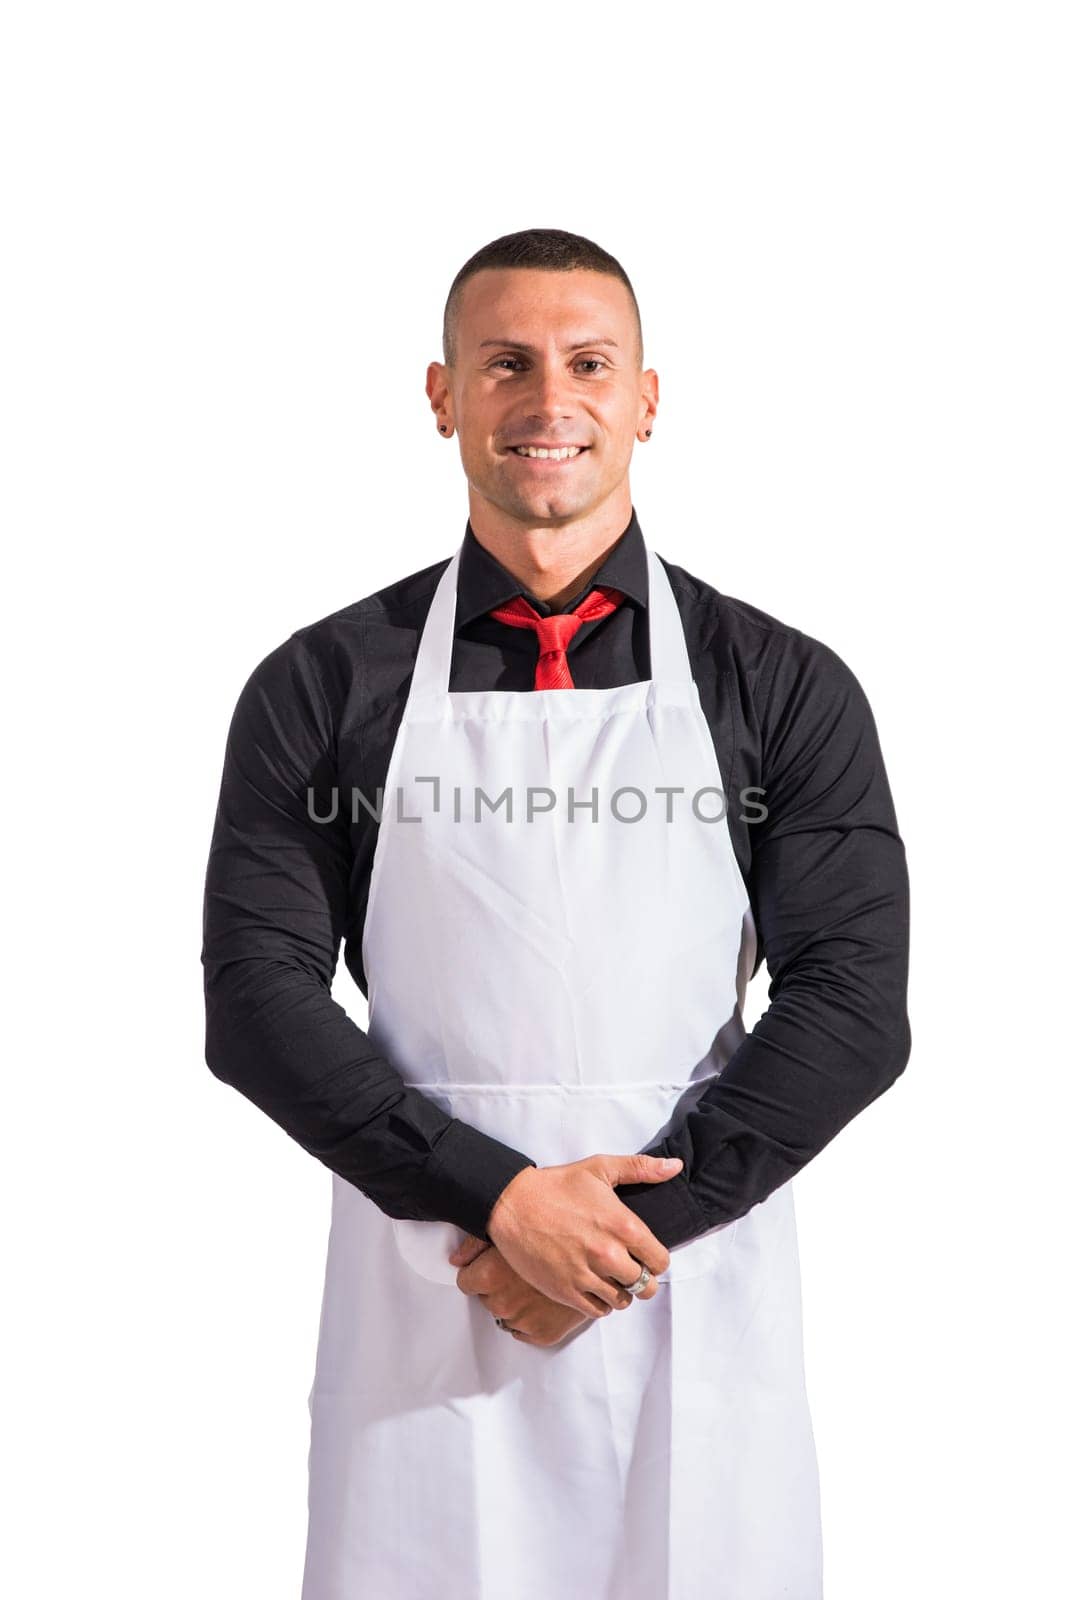 Attractive chef or waiter posing, wearing white apron and black shirt isolated on white background, in studio shot